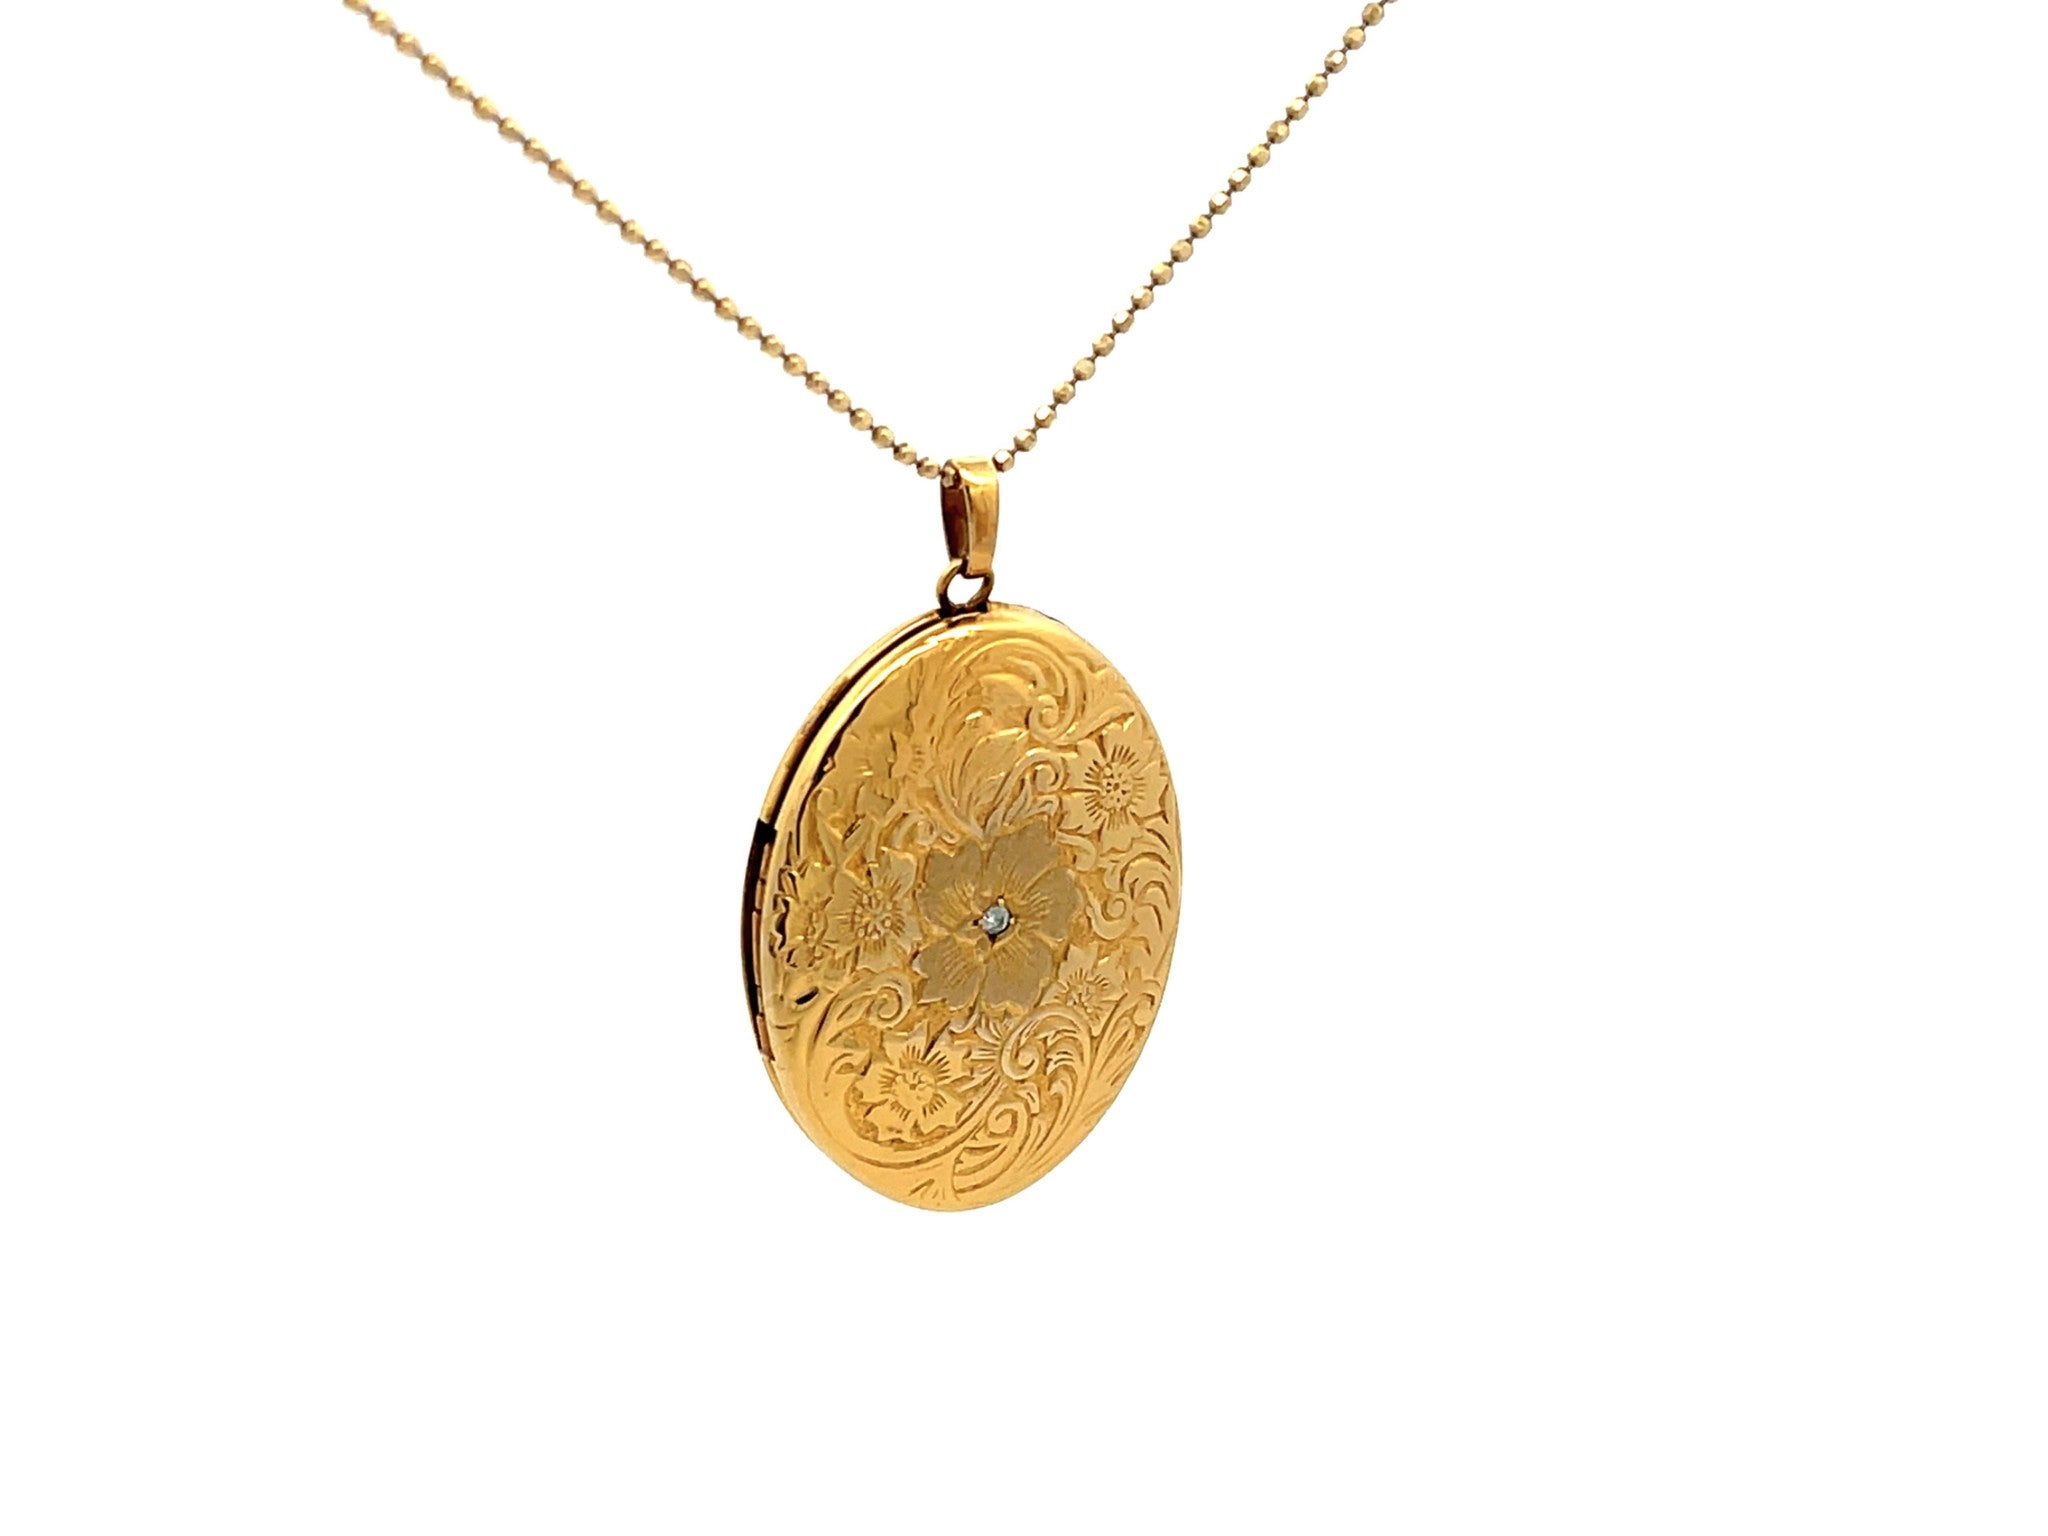 Engraved Diamond Plumeria Oval Locket Necklace in 14k Yellow Gold